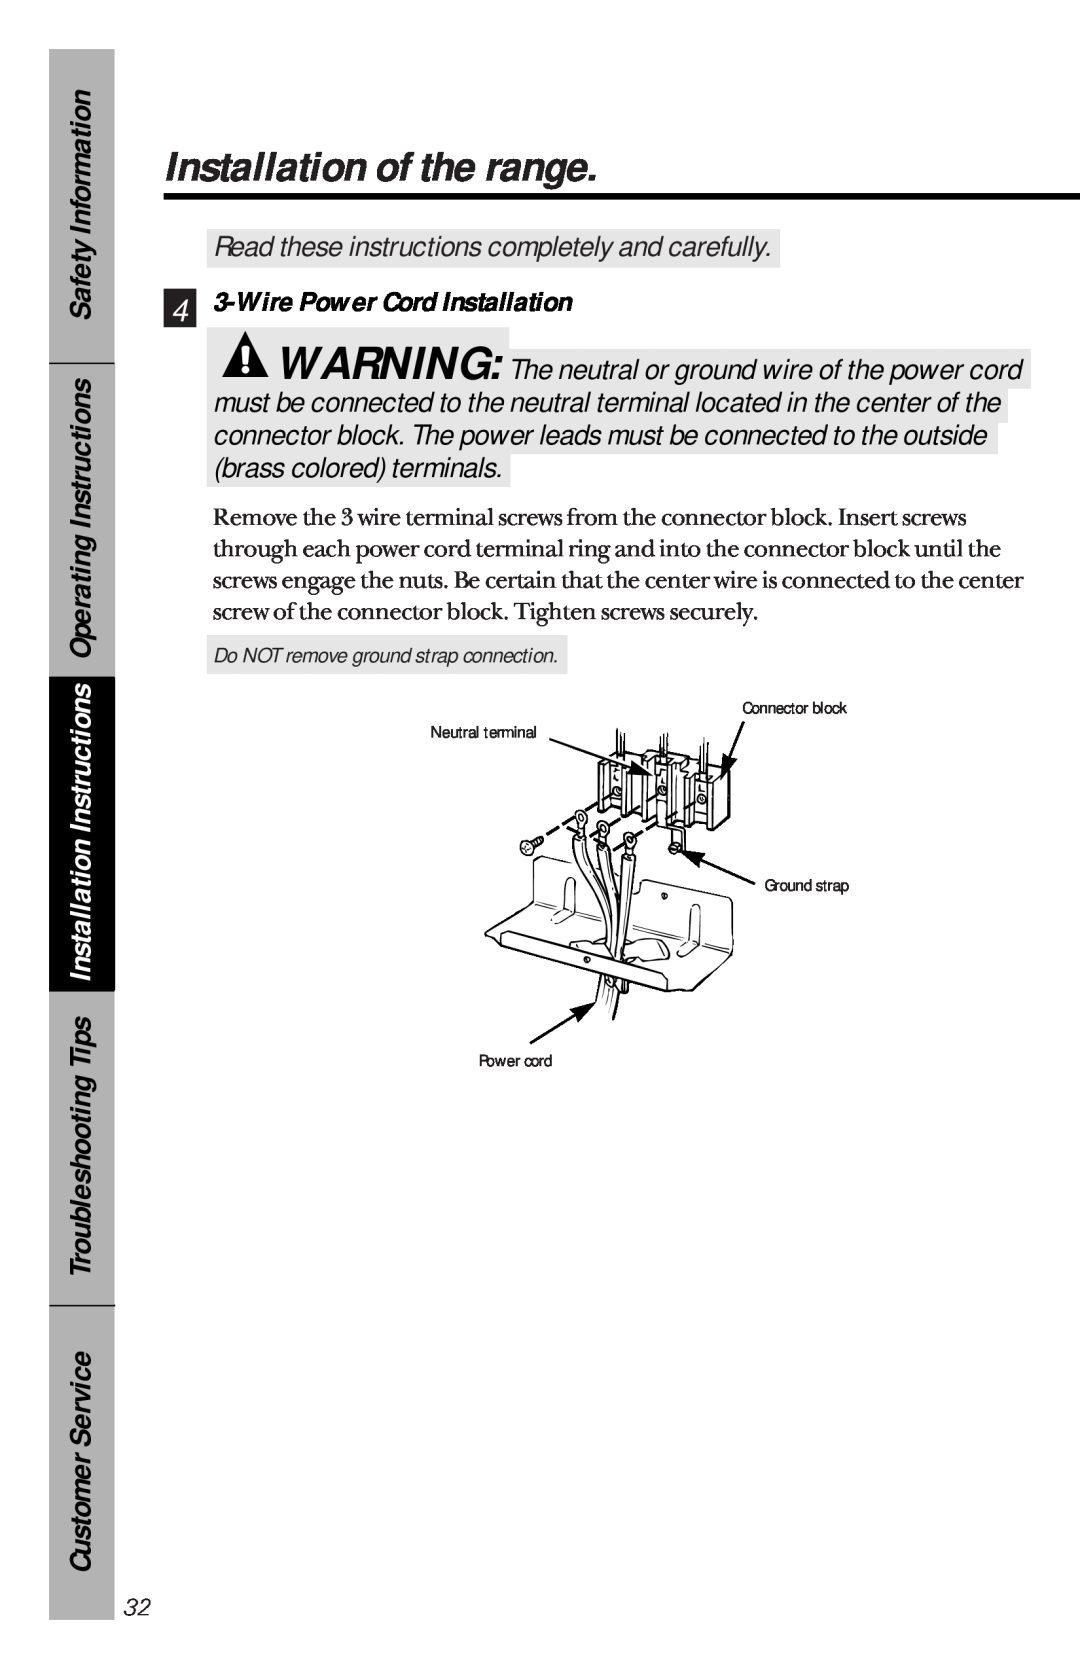 GE JBP21 4 3-Wire Power Cord Installation, Installation of the range, Read these instructions completely and carefully 